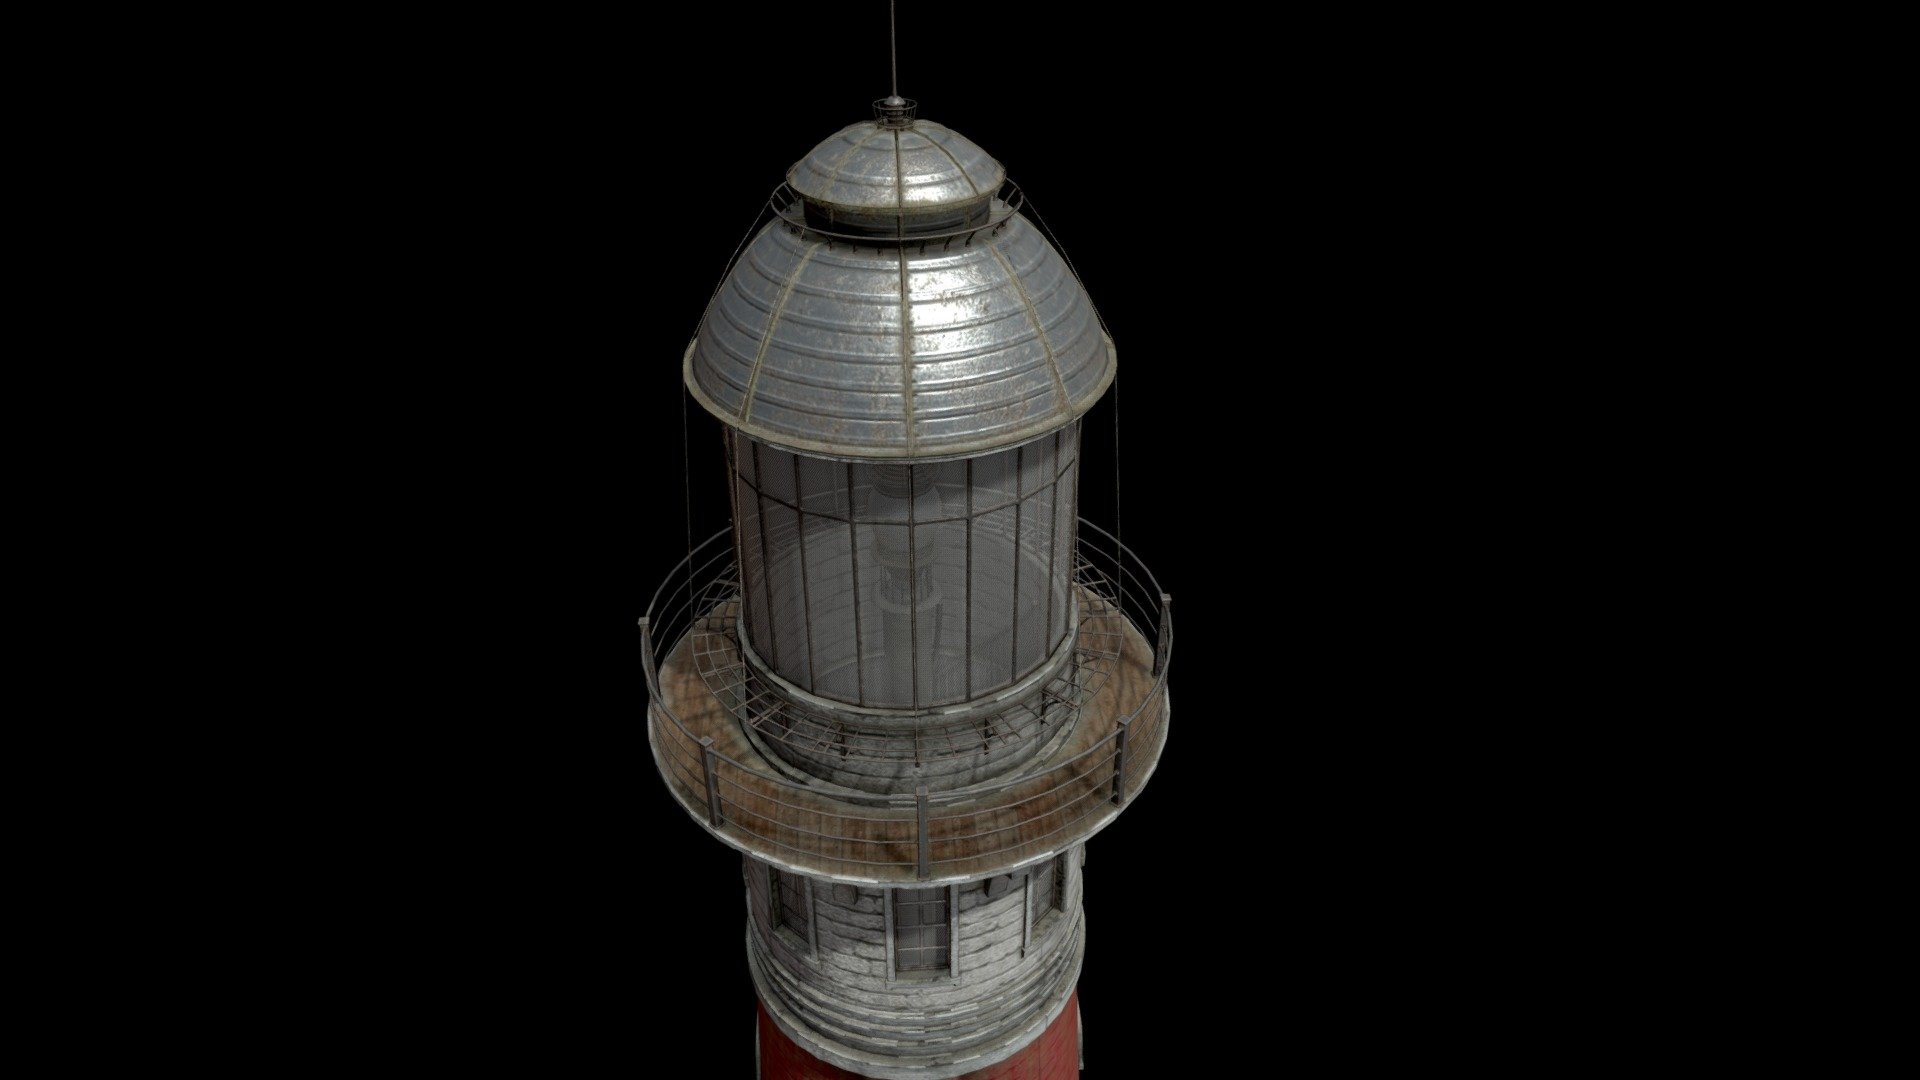 Lighthouse, ready for Games, Movies, Arch viz, all type of projects.

Formats:

OBJ,

Blend,

FBX,

GLB (Packed Textures),

DAE,

USD,

ABC.

Textures in 6K UV-Unwrap, Non-Overlapping 3d model